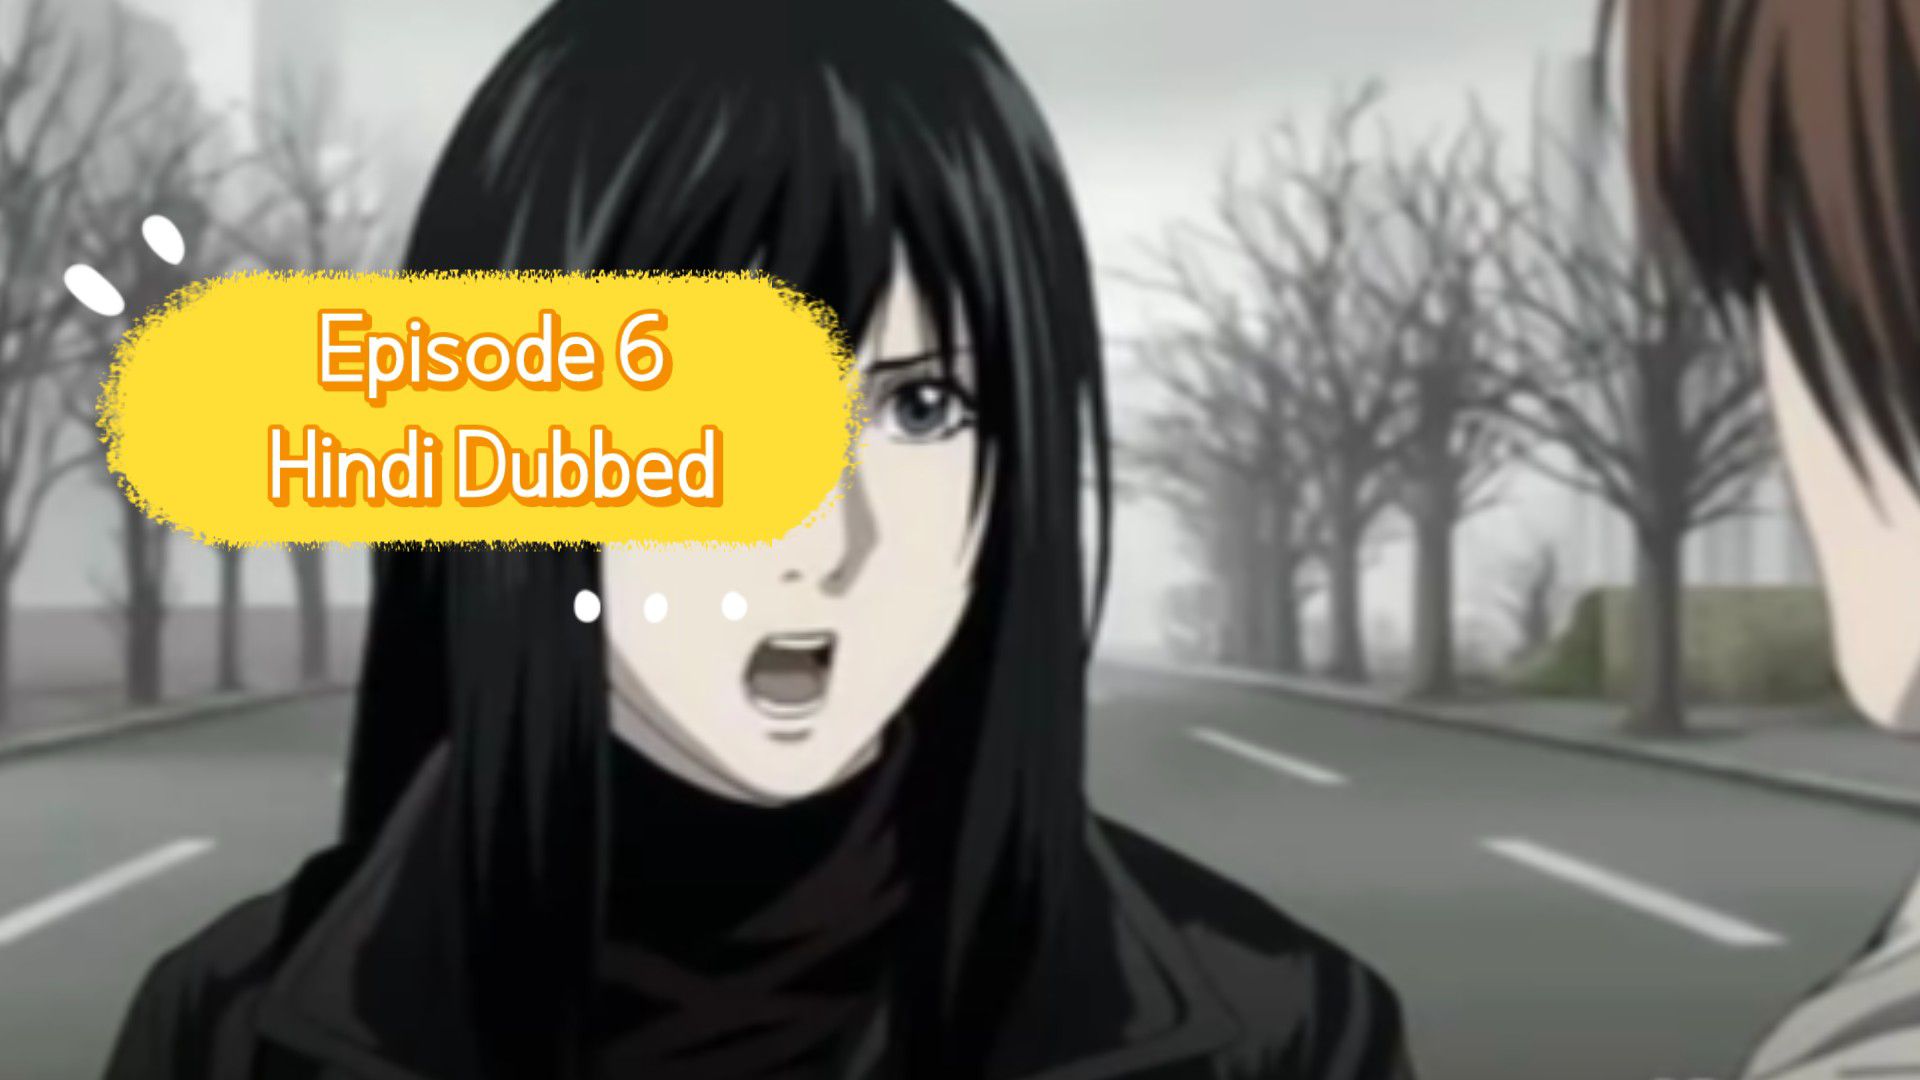 Death Note Episode 10 In Hindi, Doubt